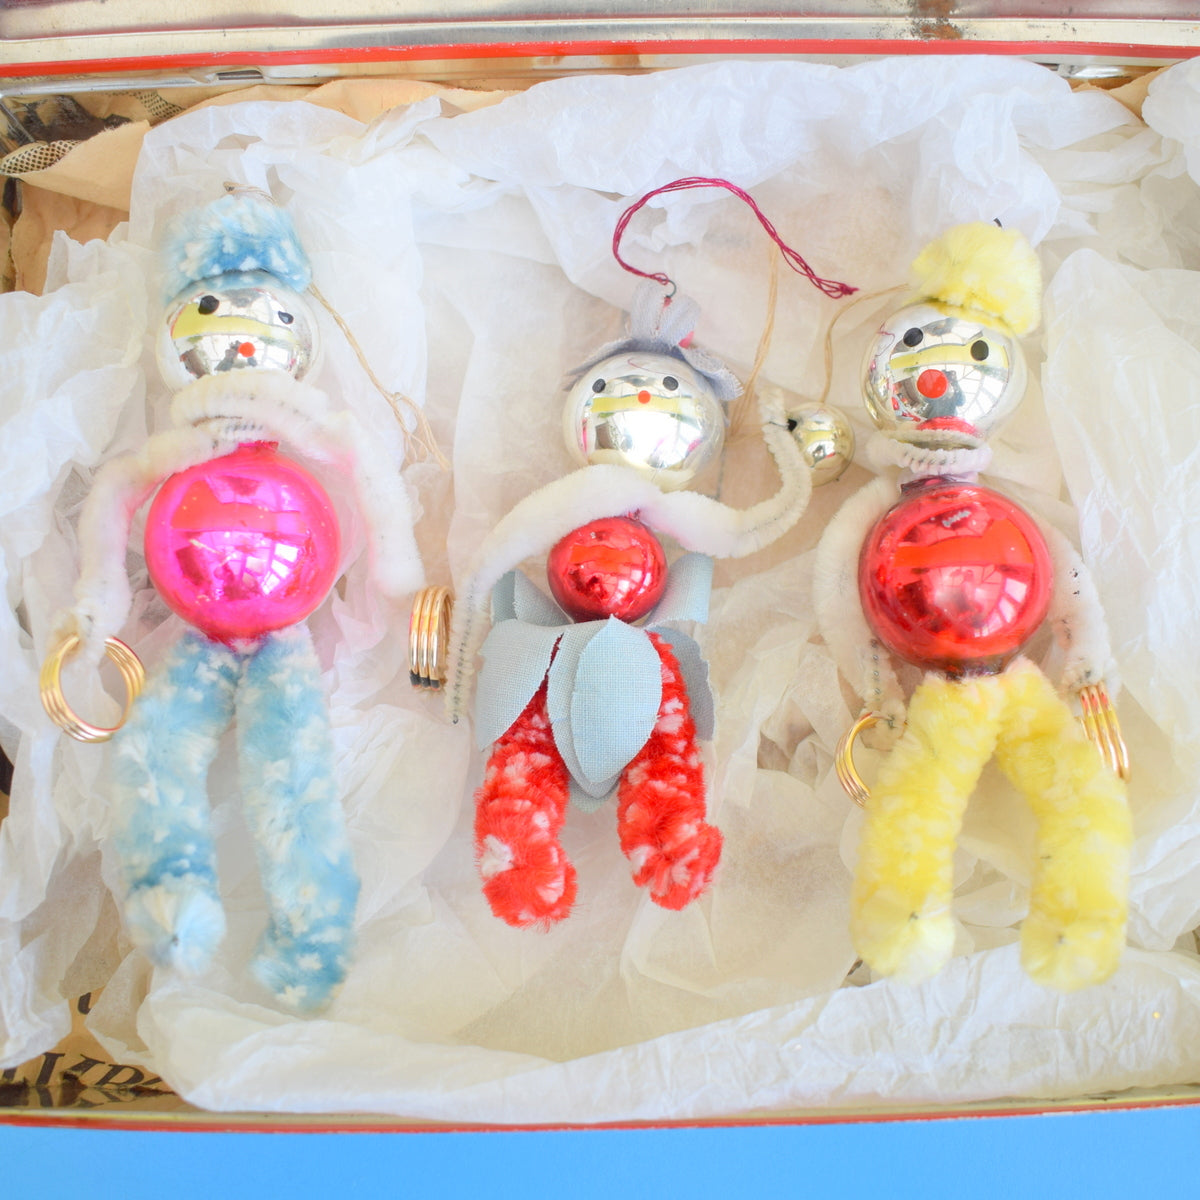 Vintage 1950s Pipe Cleaner People / Glass Christmas Decorations x3 - In Vintage Christmas tin